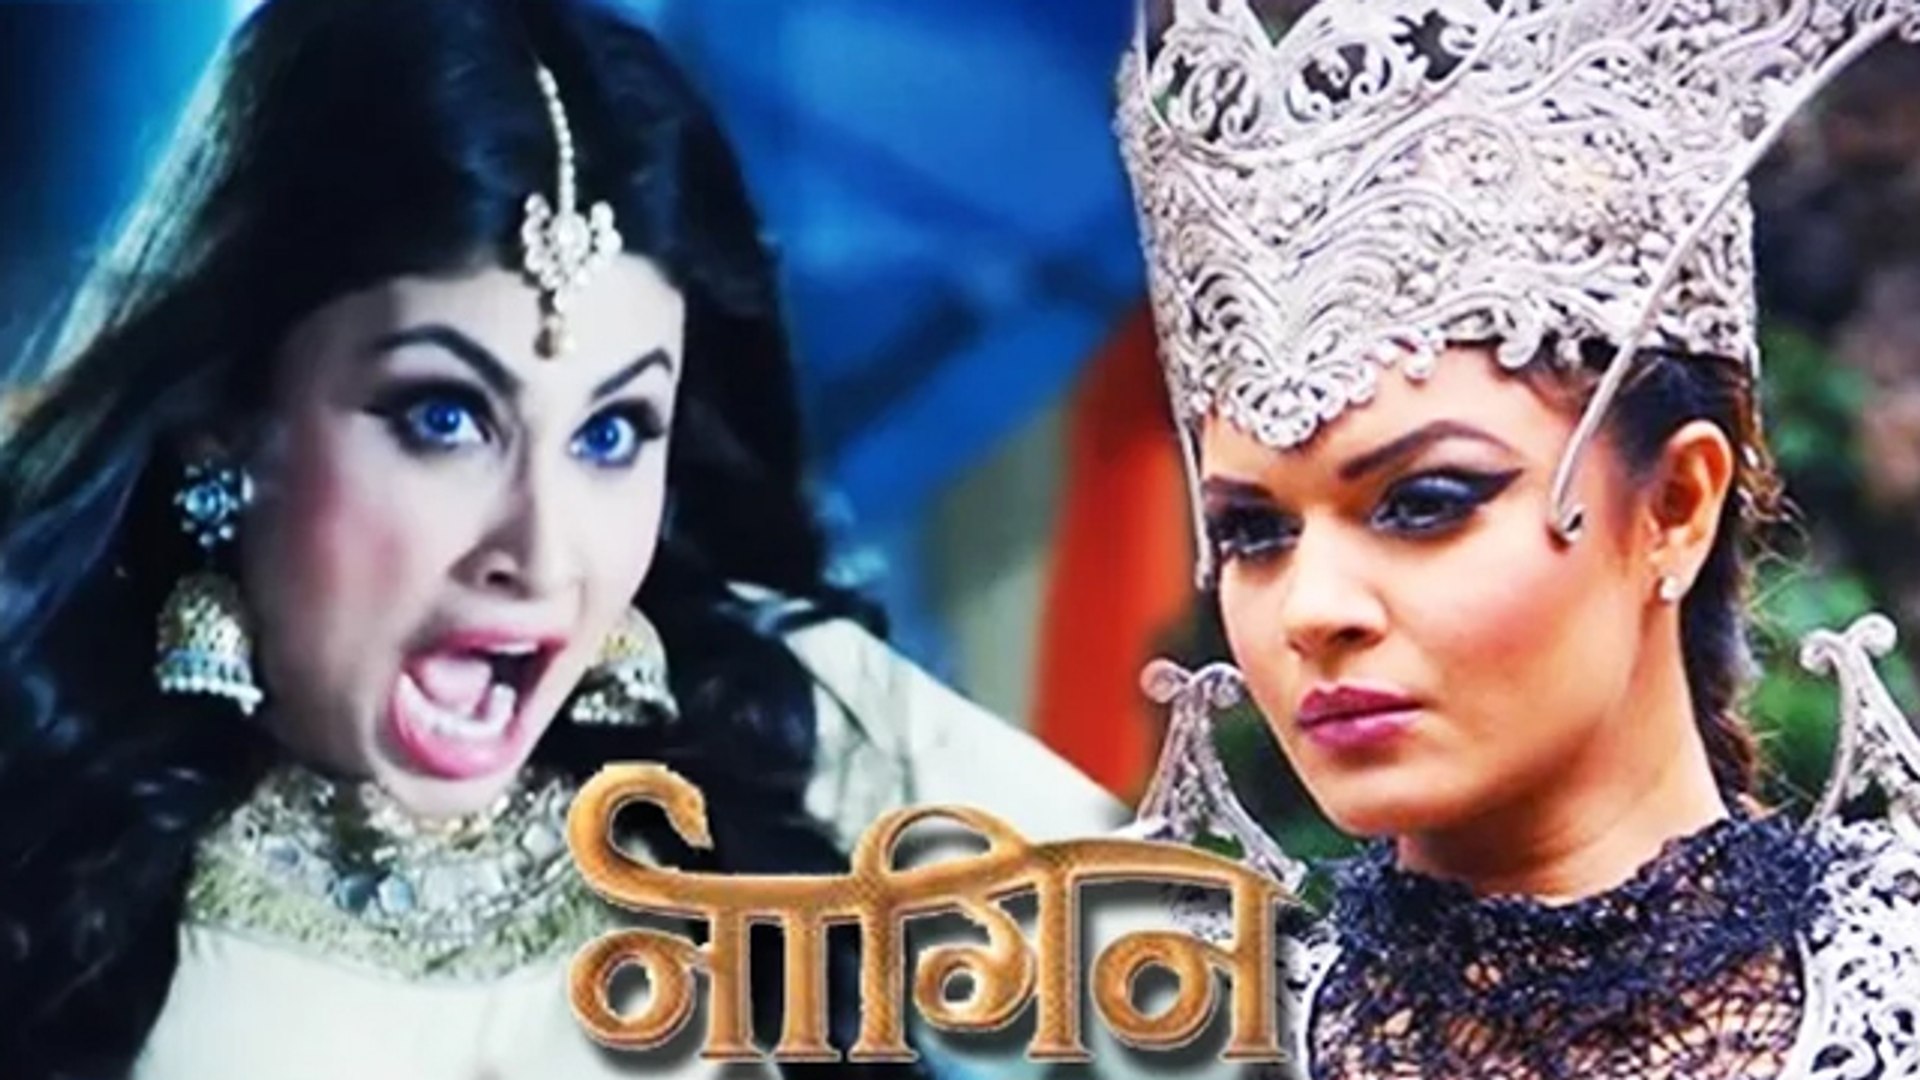 Aashka Goradia Enters Naagin As Immortal Queen Video Dailymotion Television actress aashka goradia made it to the headlines earlier for tying the knot with american beau brent goble on the 3rd of december last year and now she caught our attention once again. aashka goradia enters naagin as immortal queen